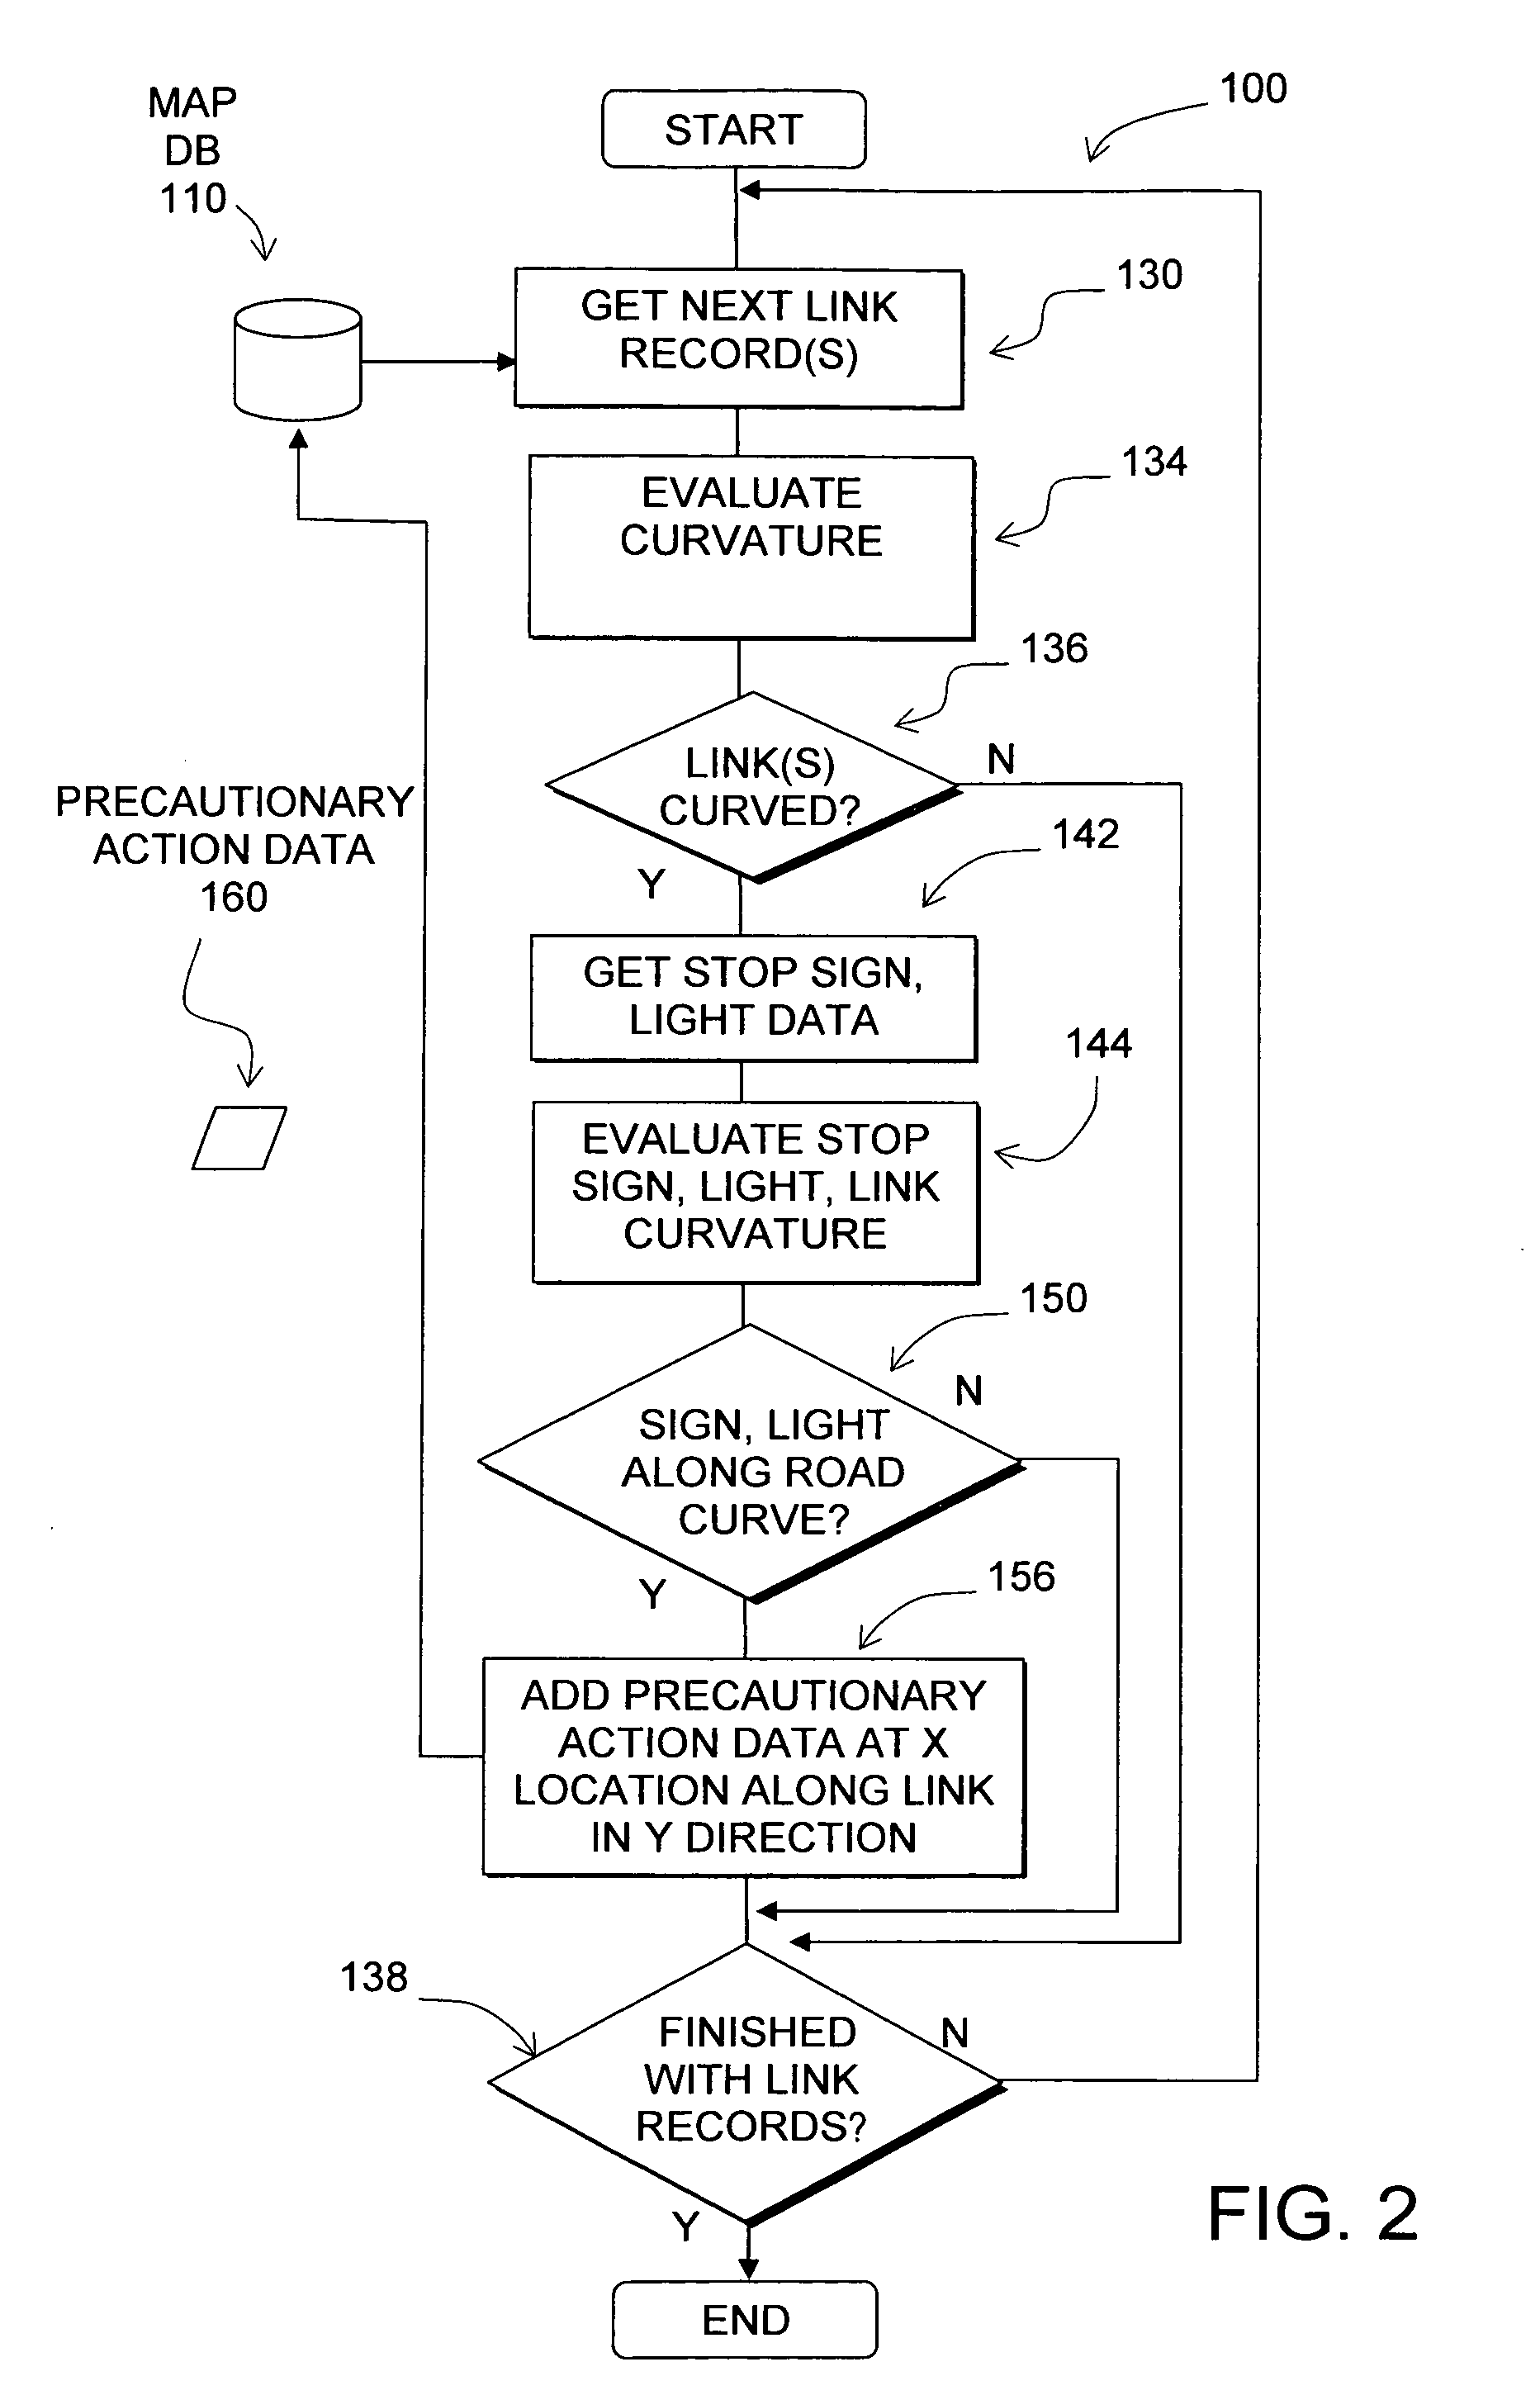 Data mining for traffic signals or signs along road curves and enabling precautionary actions in a vehicle